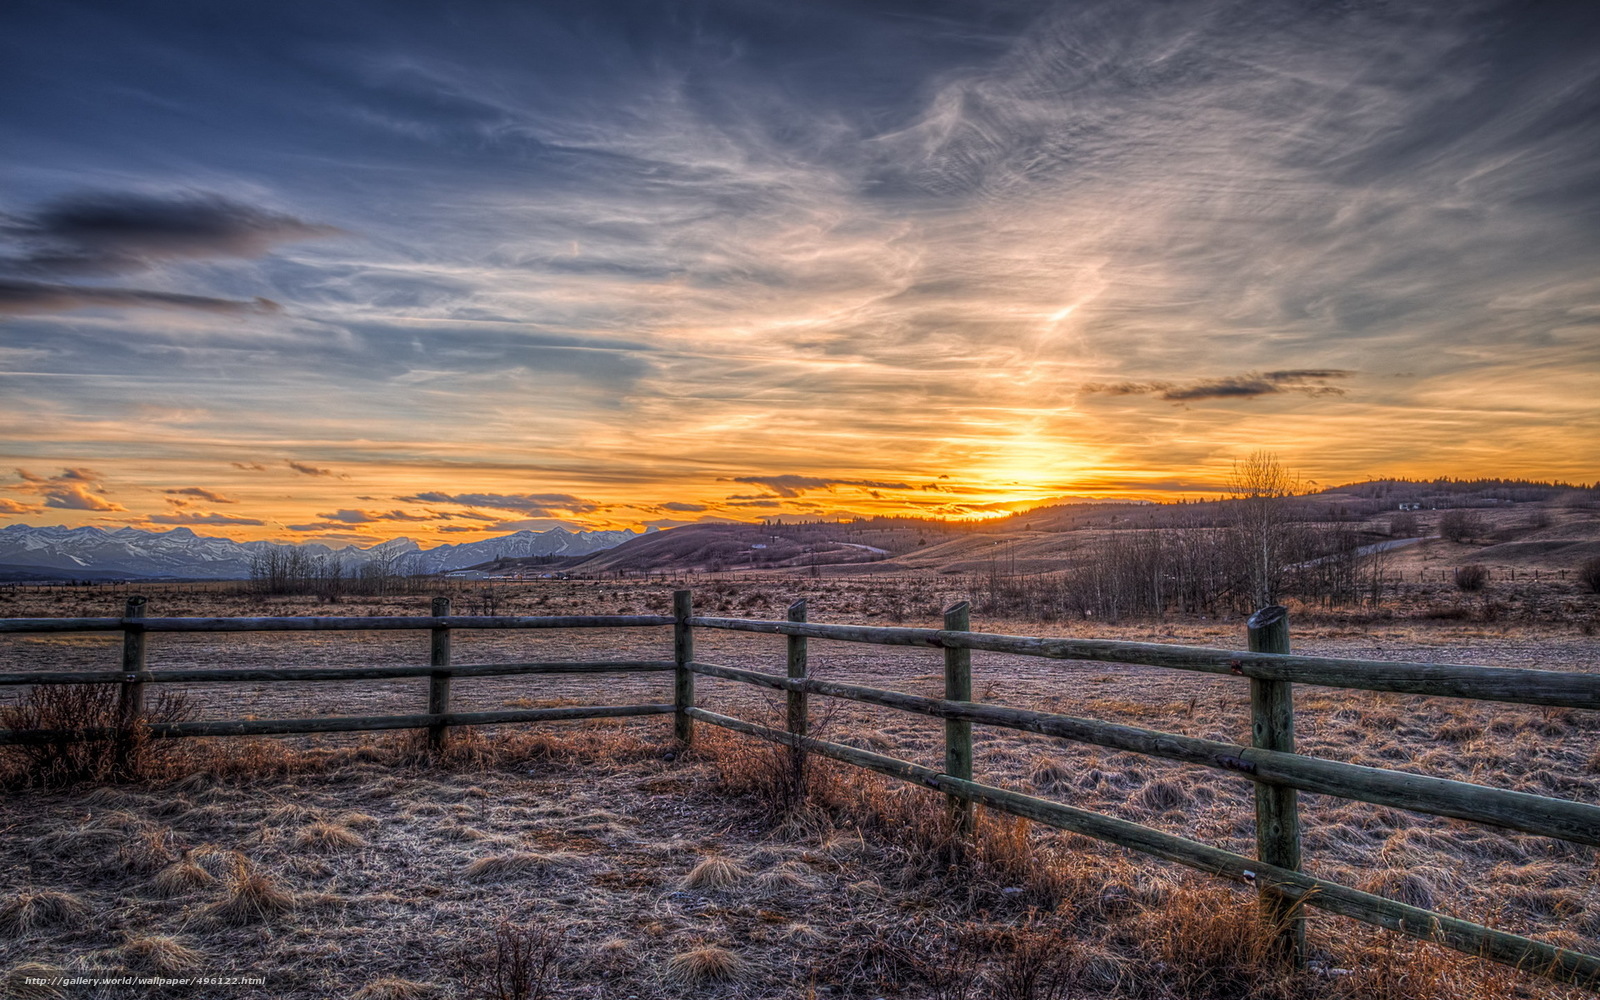 Download Wallpaper Canada, Alberta, Stoney Indian Reserve, - Sunset Background With Fence - HD Wallpaper 